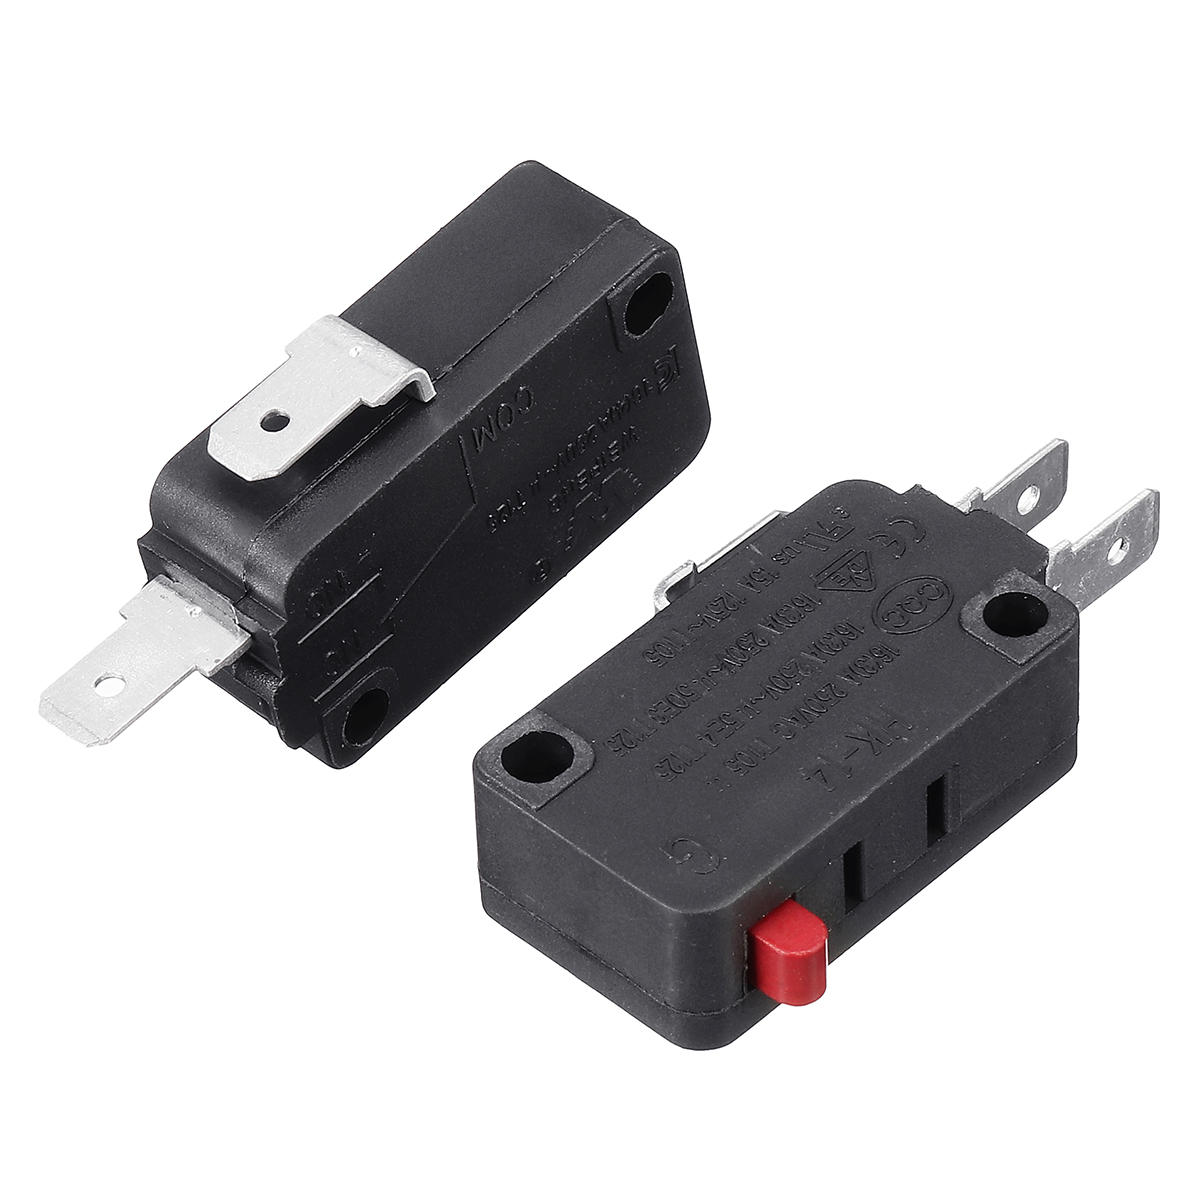 2pcs microwave oven door micro switch for lg ge starion szm-v16-fd-63